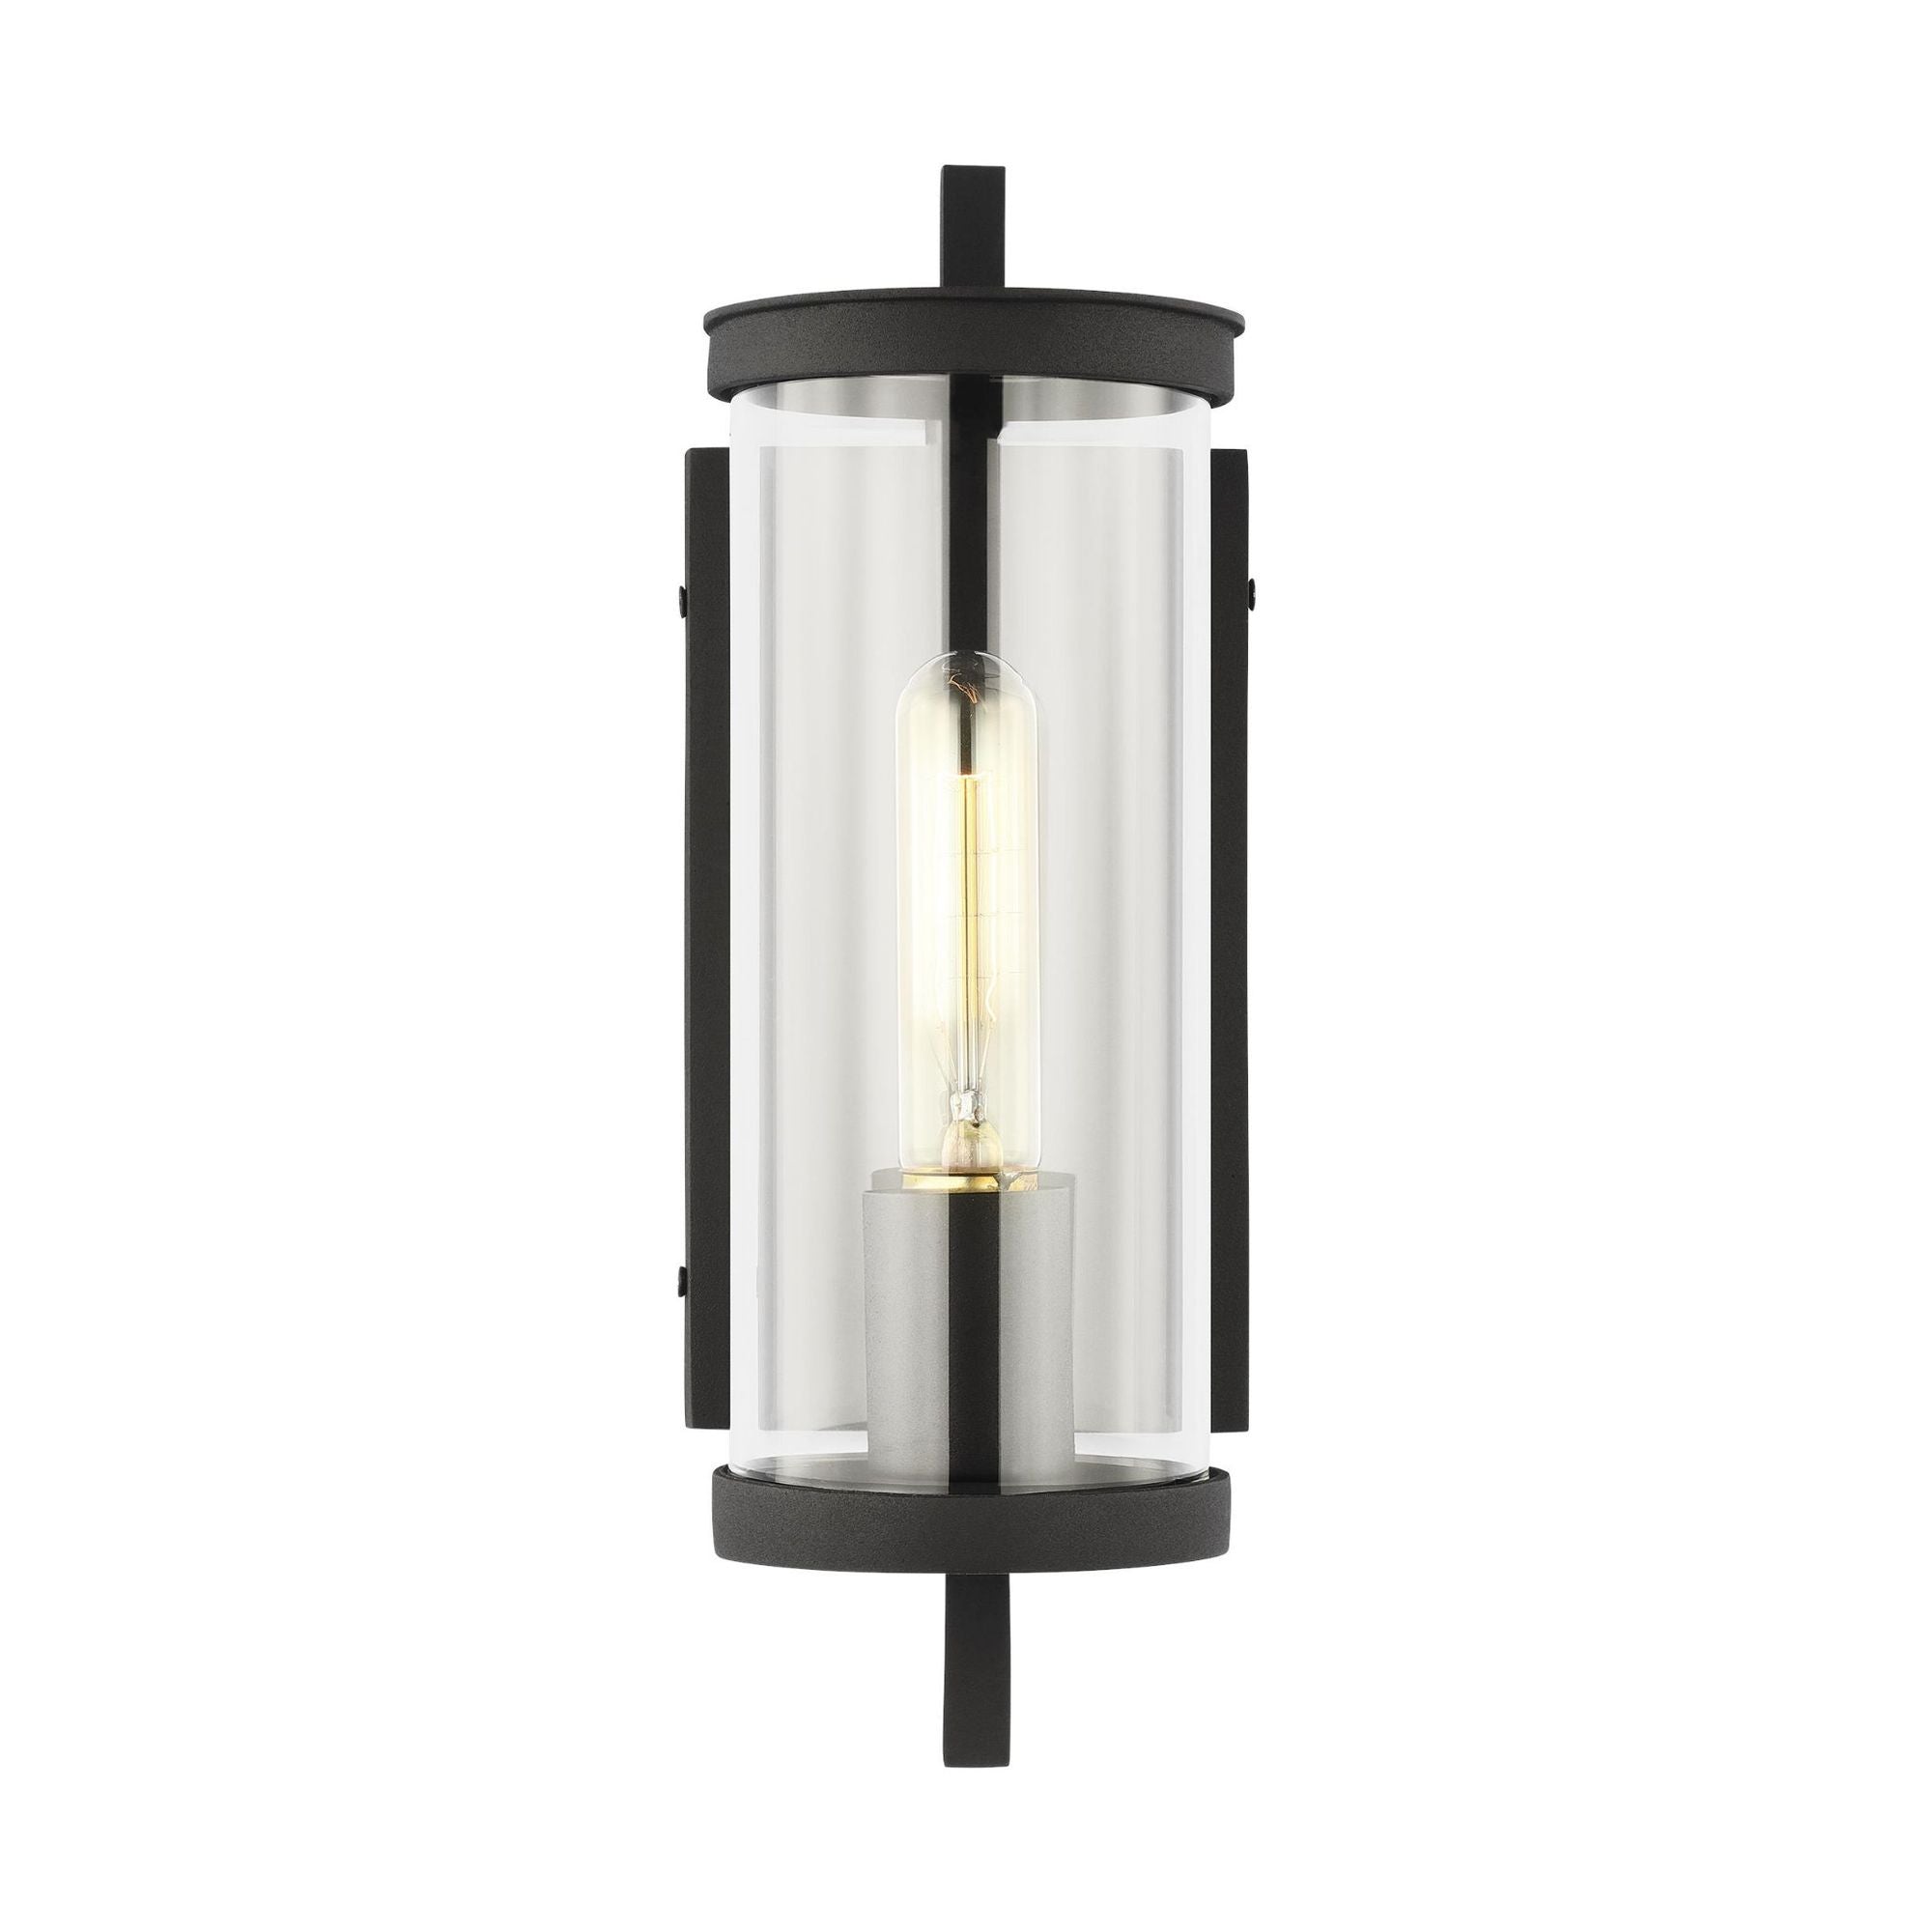 Chapman & Myers Eastham Extra Small Wall Lantern in Textured Black